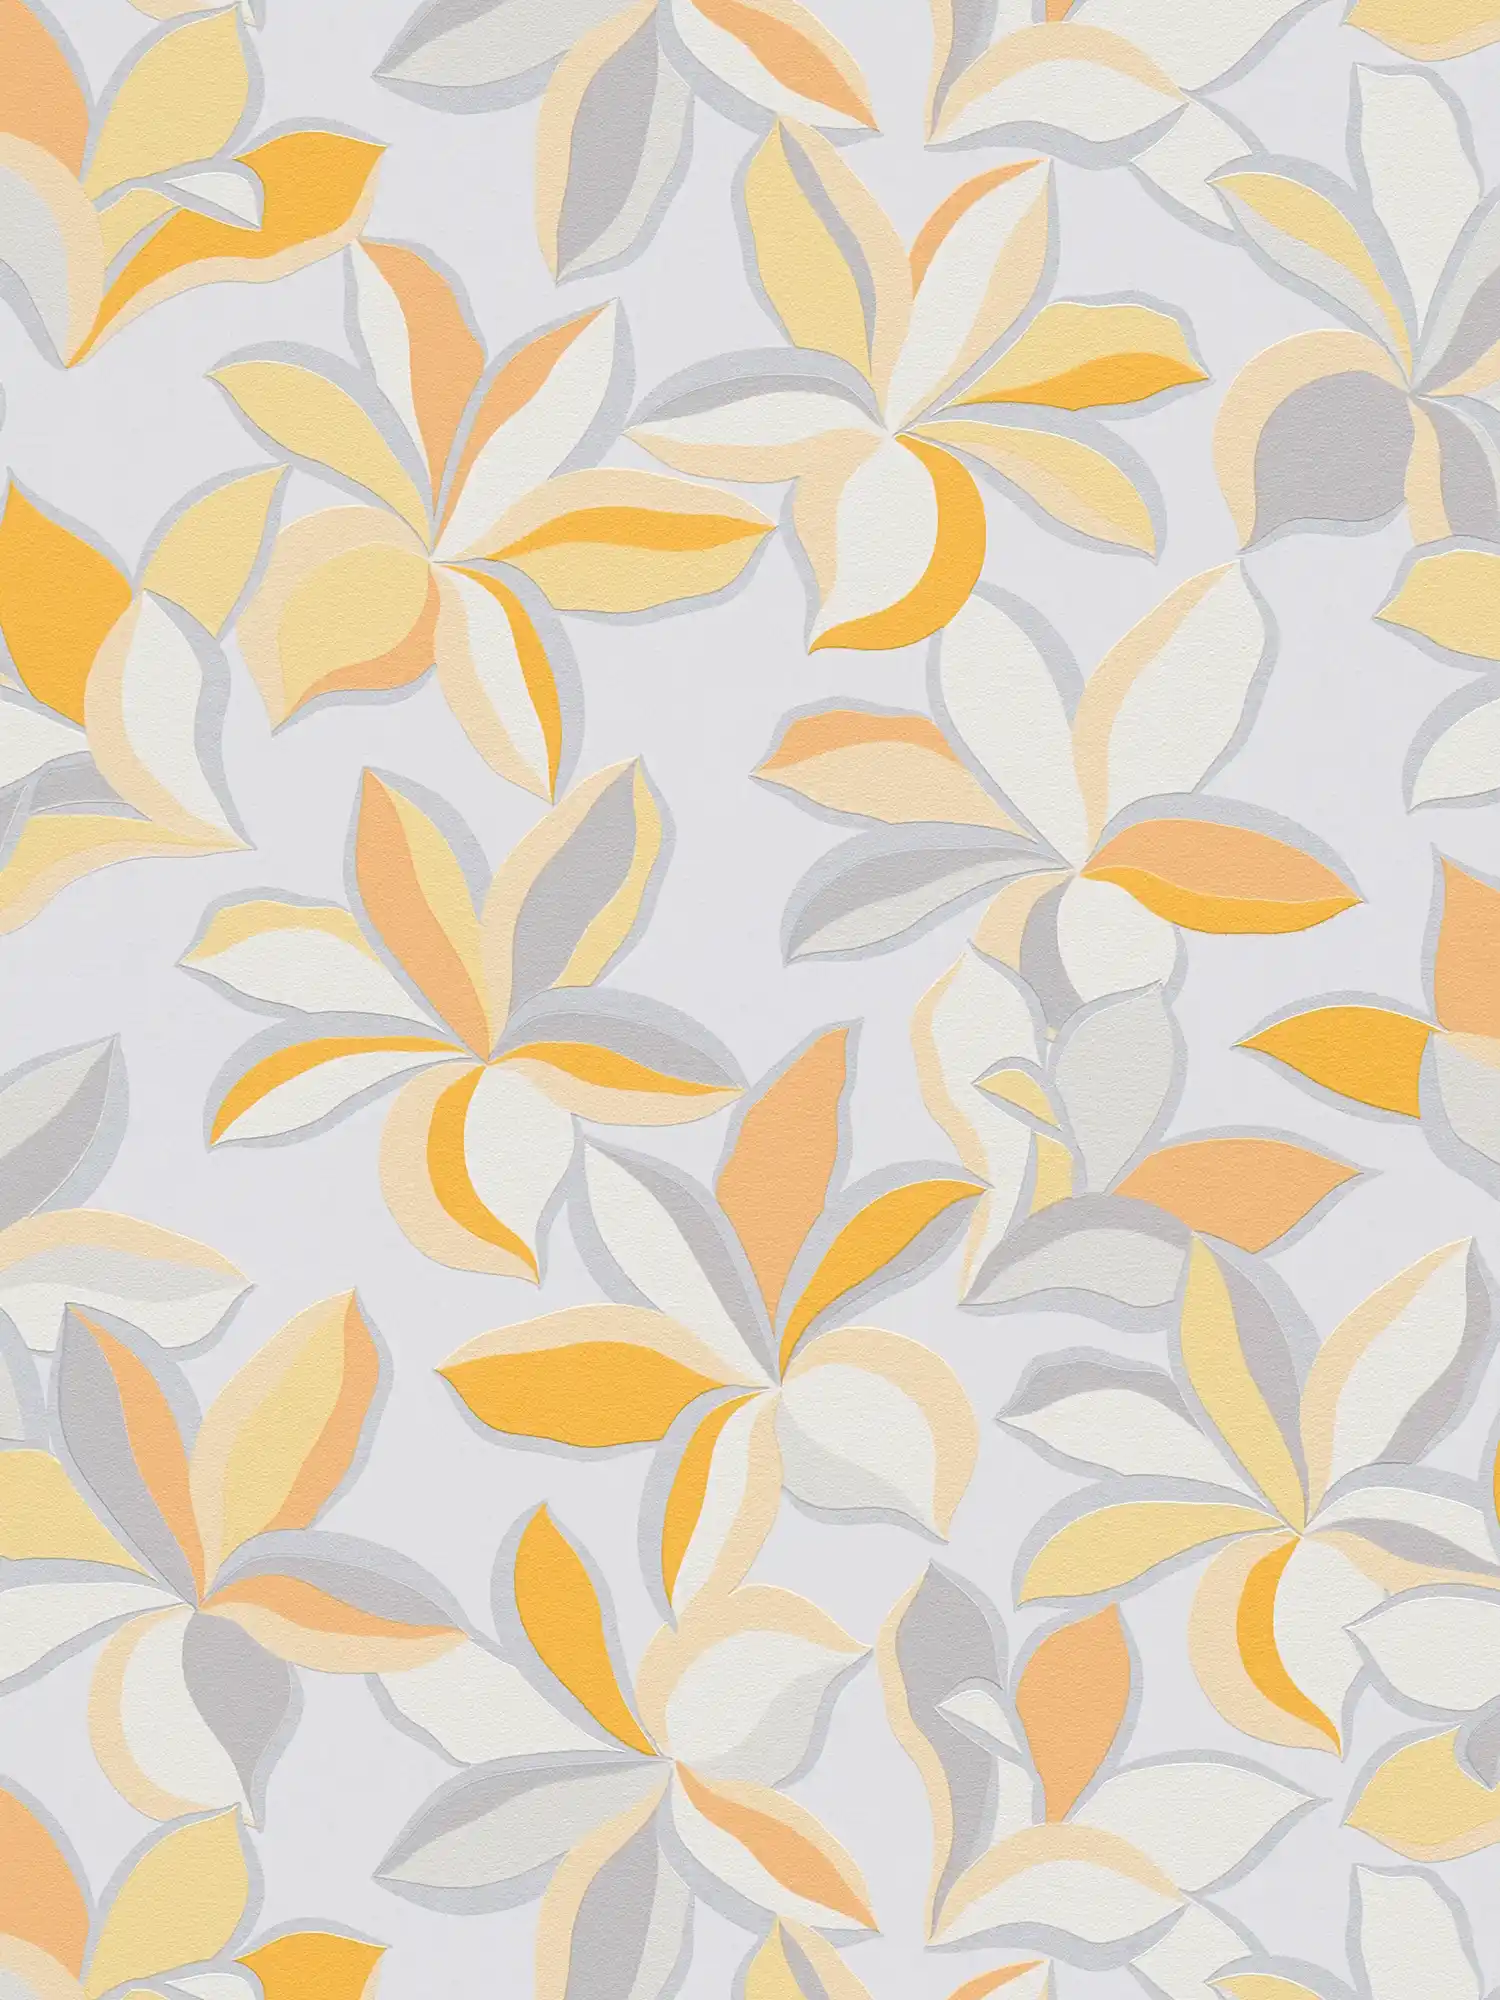 Non-woven wallpaper with floral pattern & metallic look - yellow, orange, grey
